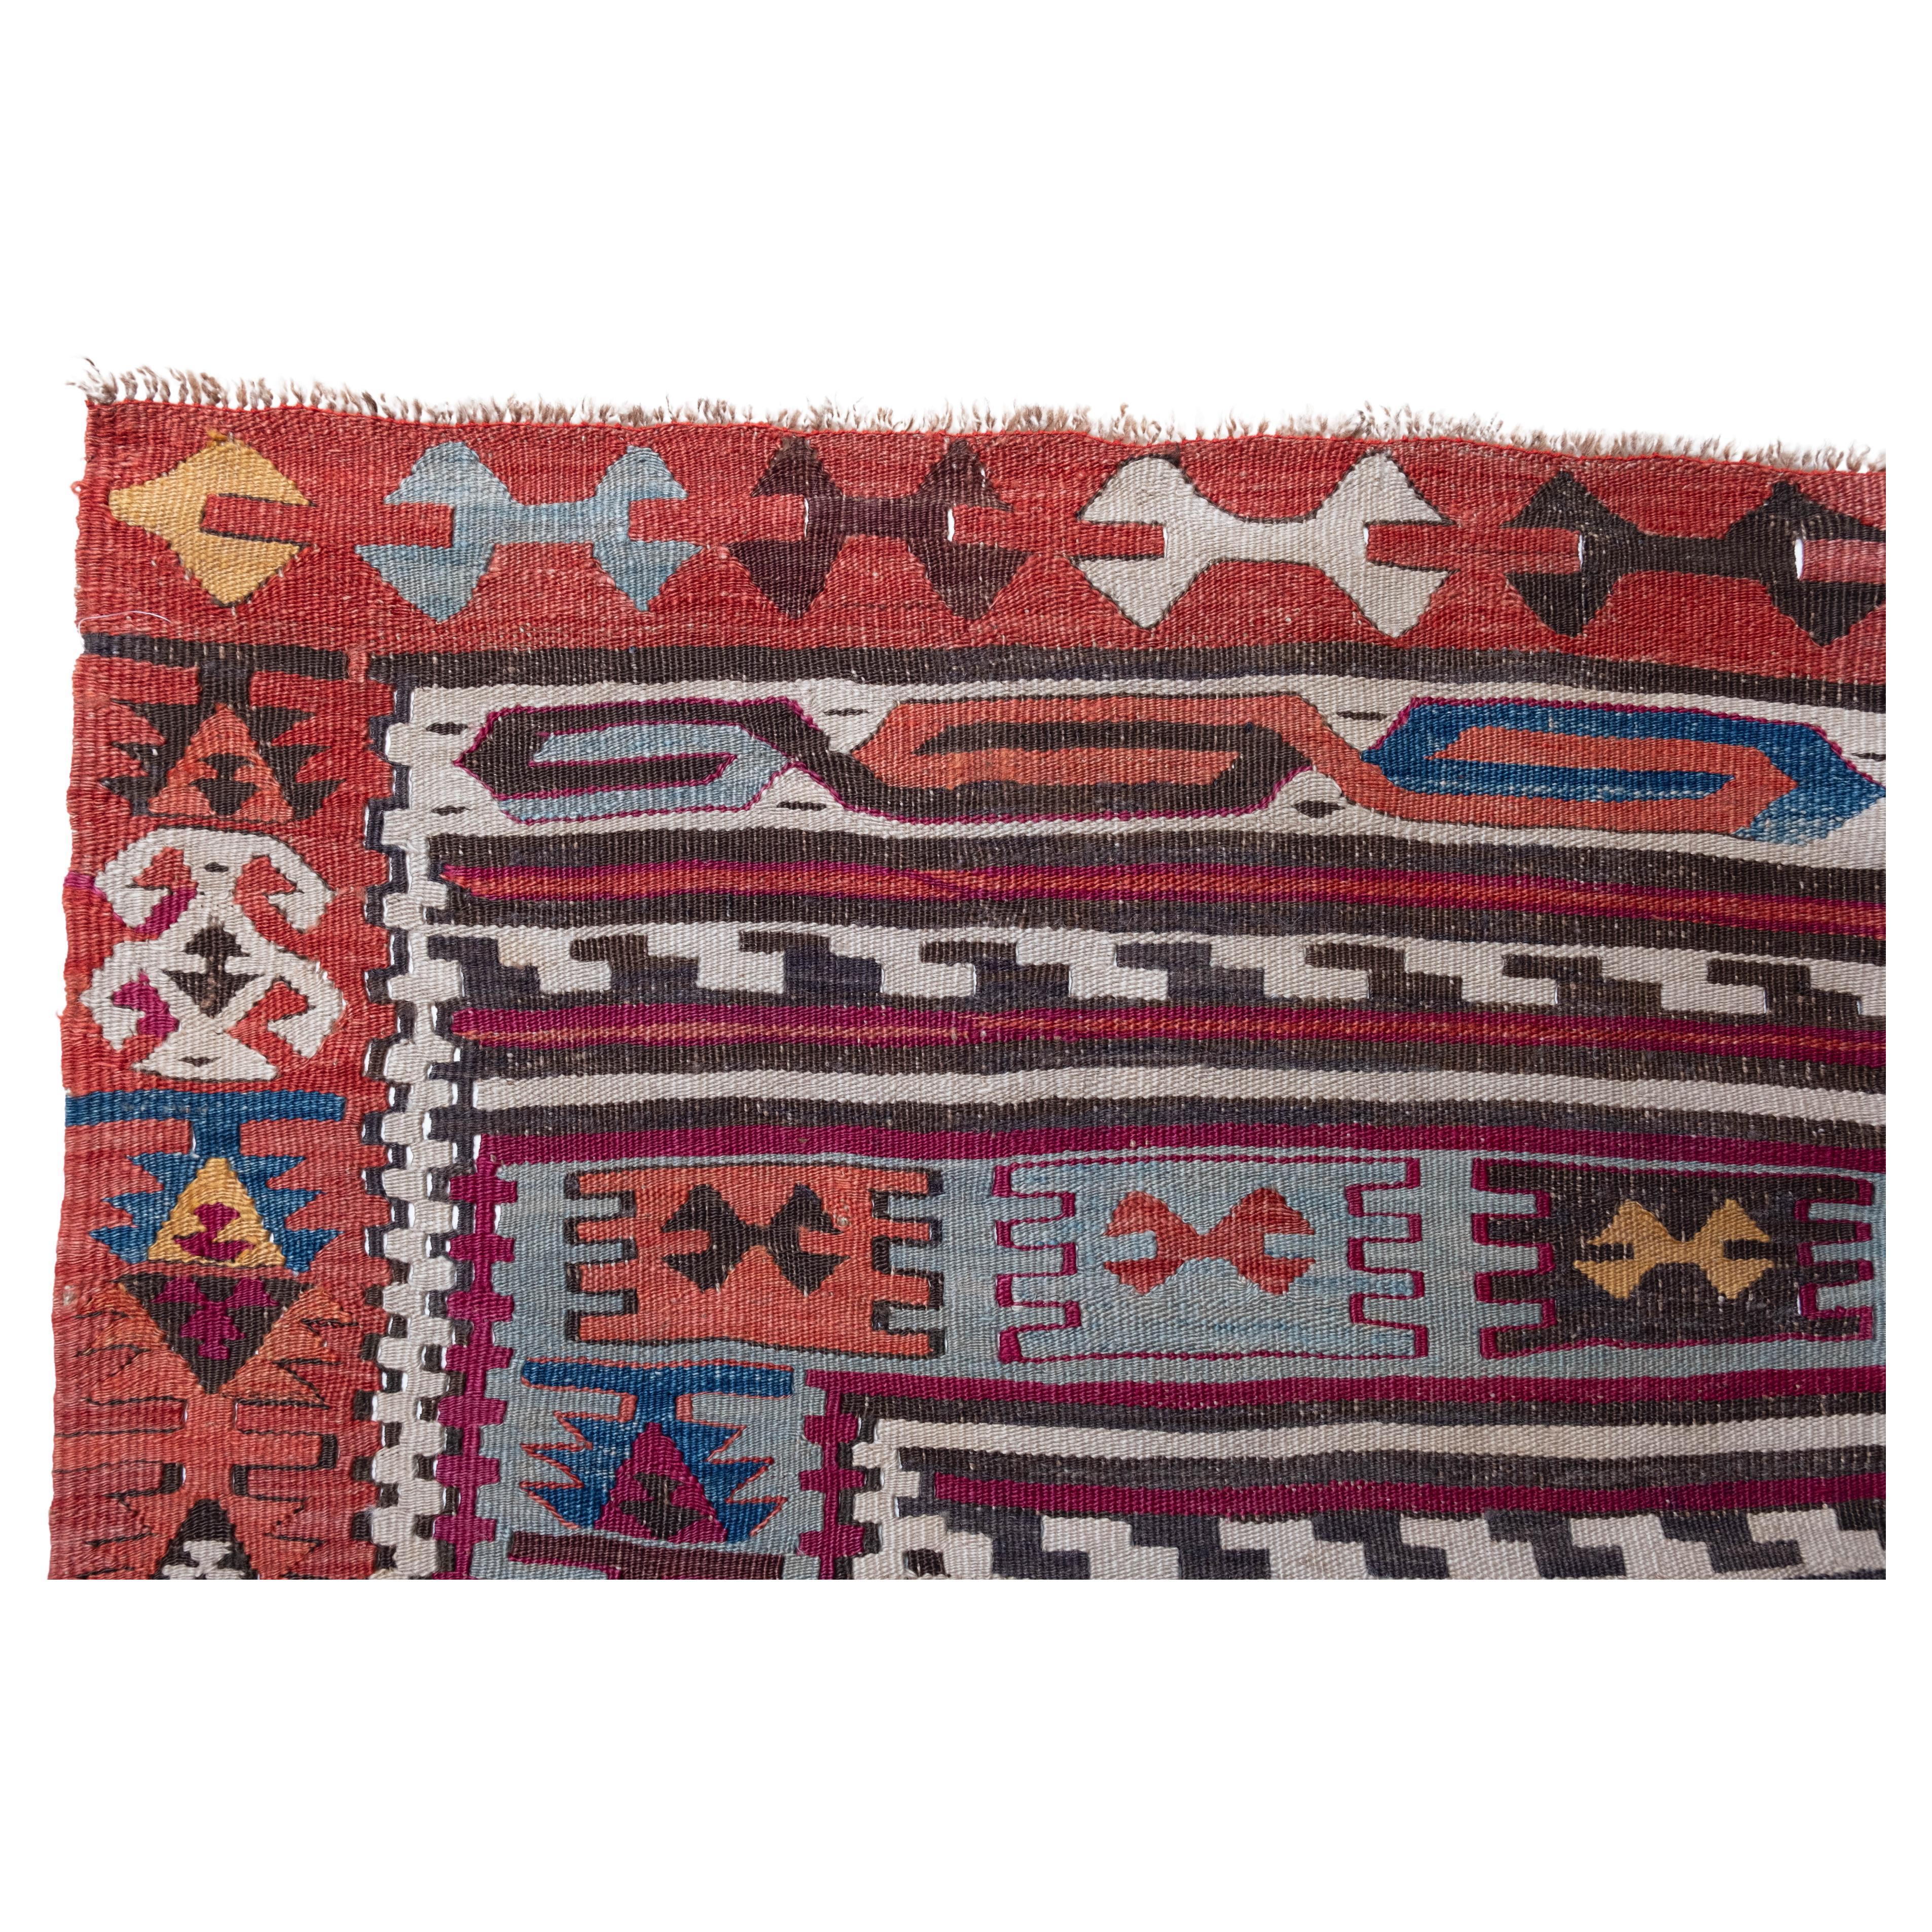 This is Central Anatolian Antique Kilim from the Corum region with a rare and beautiful color composition.

Corum has a long history as a base for Hittite ruins such as Hattusa, the capital of the ancient Hittites, Bogazkale, and Yazilikaya, and the